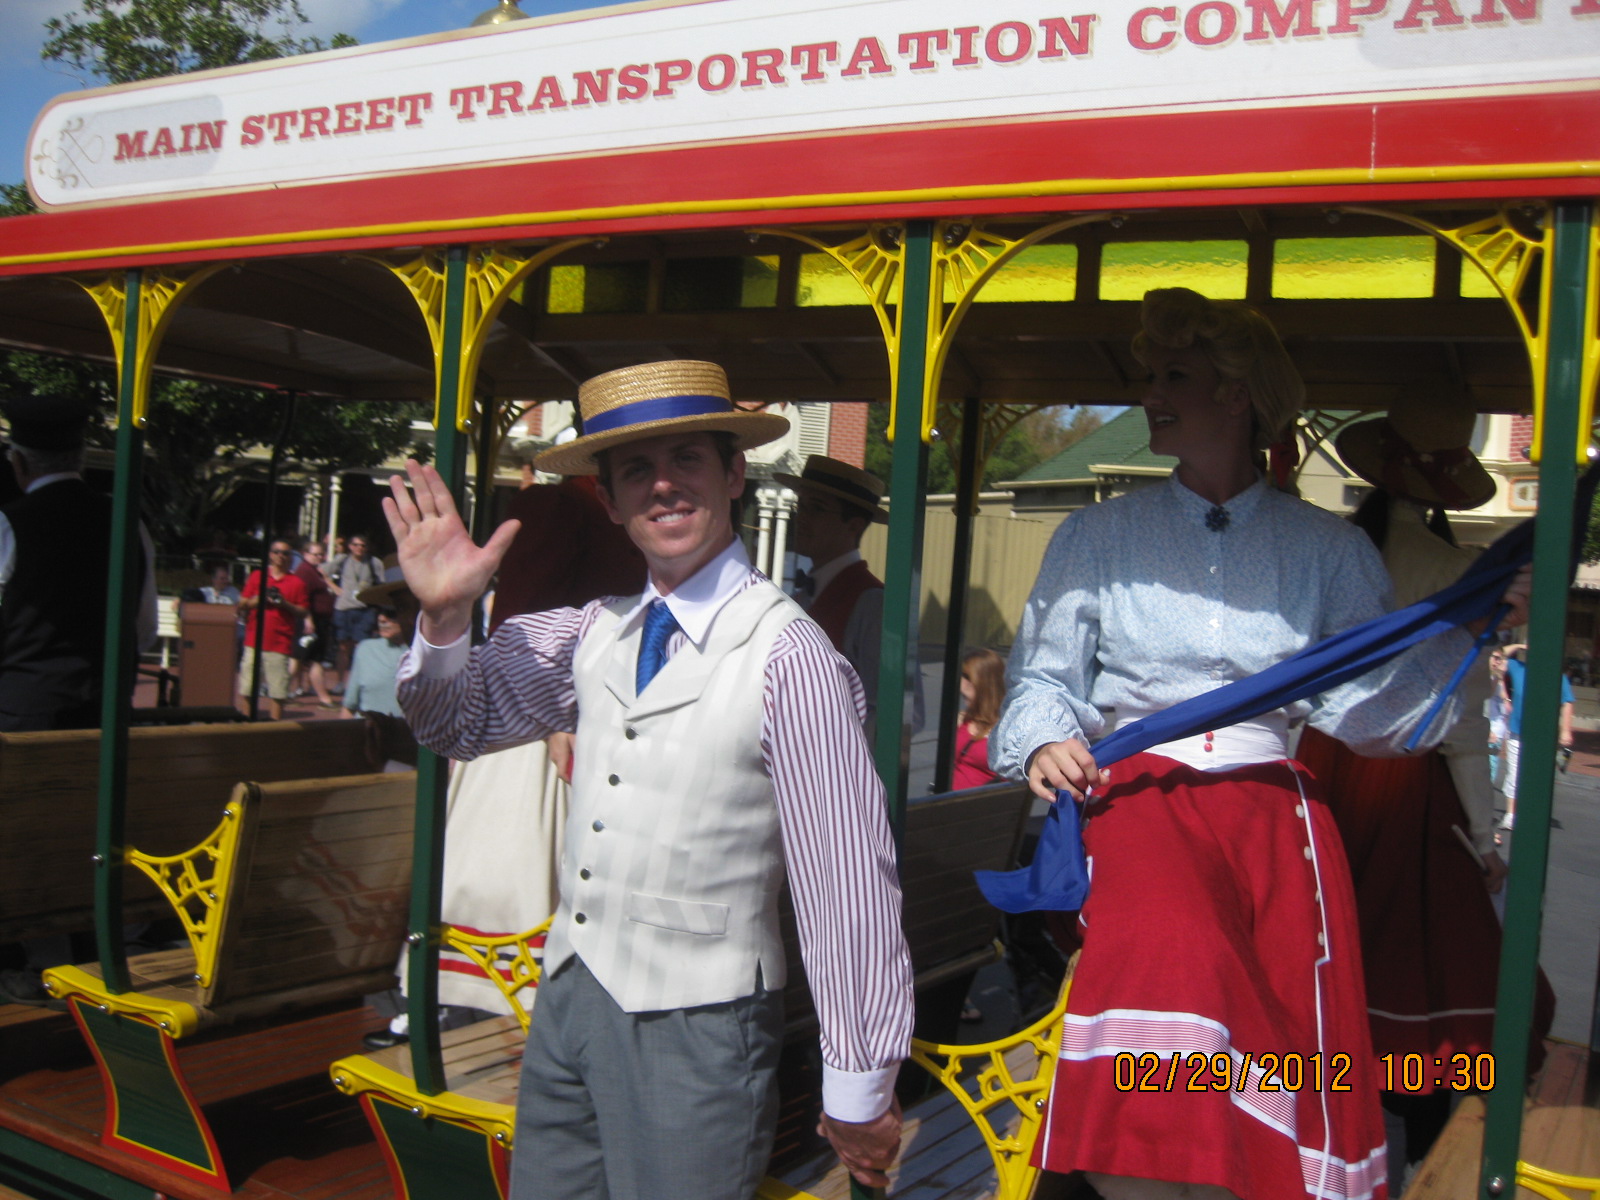 30 Main St Trolley Party (2)